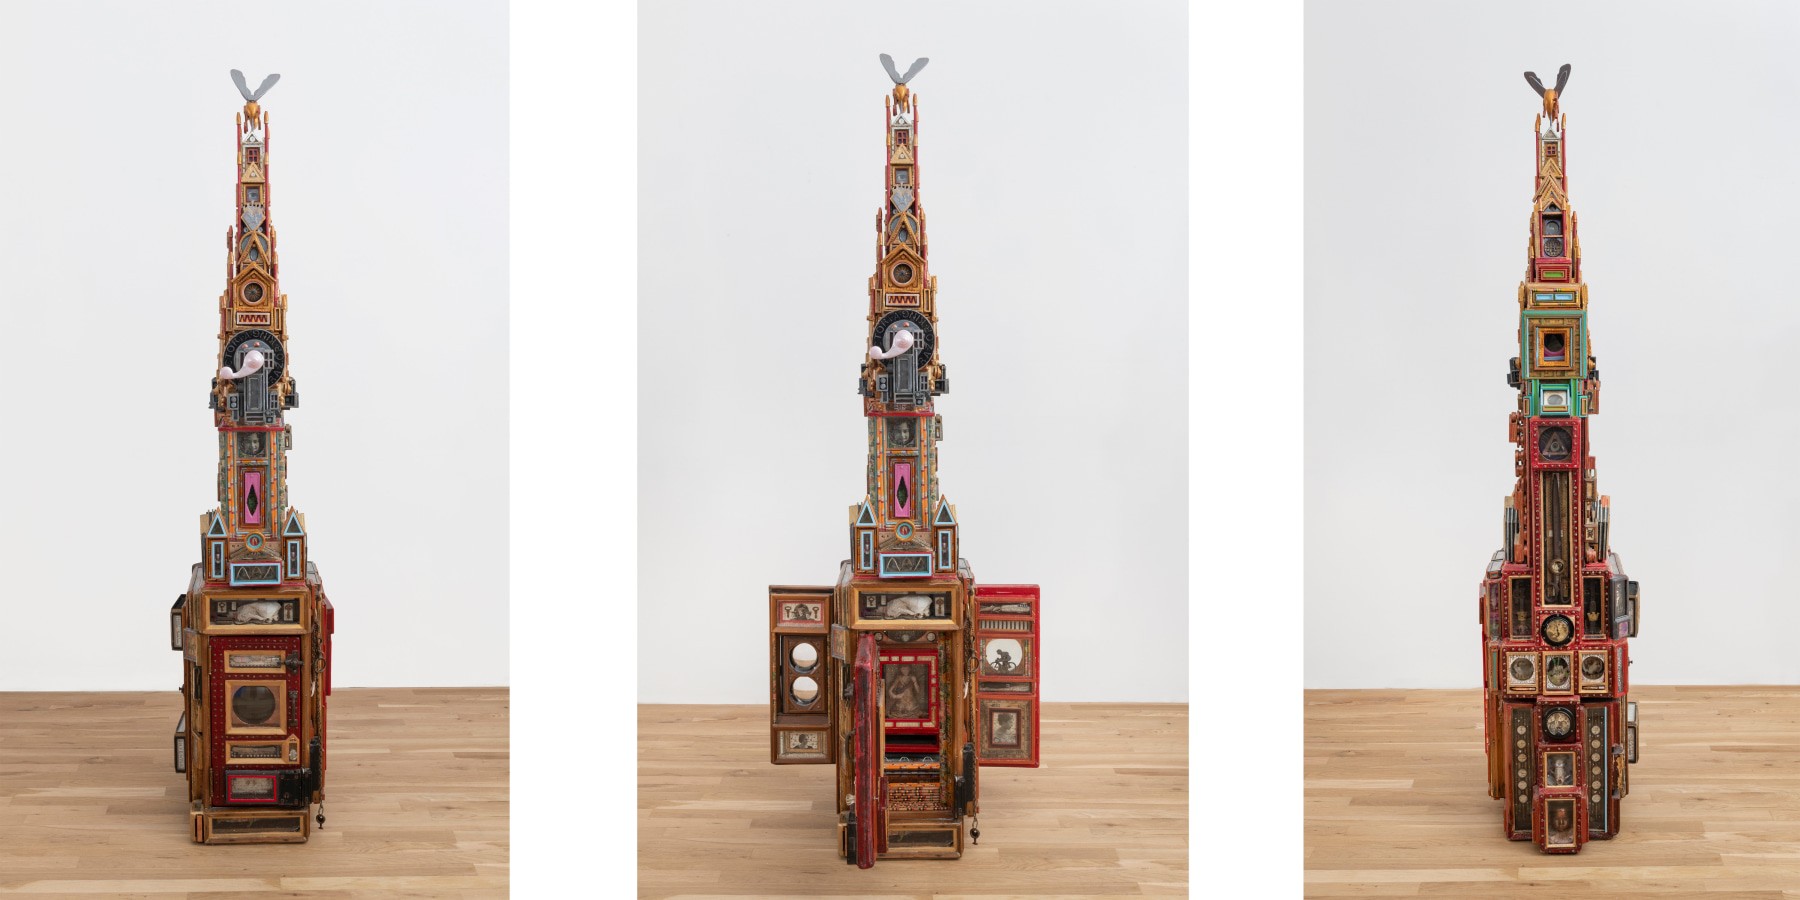 Matjames Metson, A Tower, 2023. Mixed media, 86 x 19 x 26 inches.